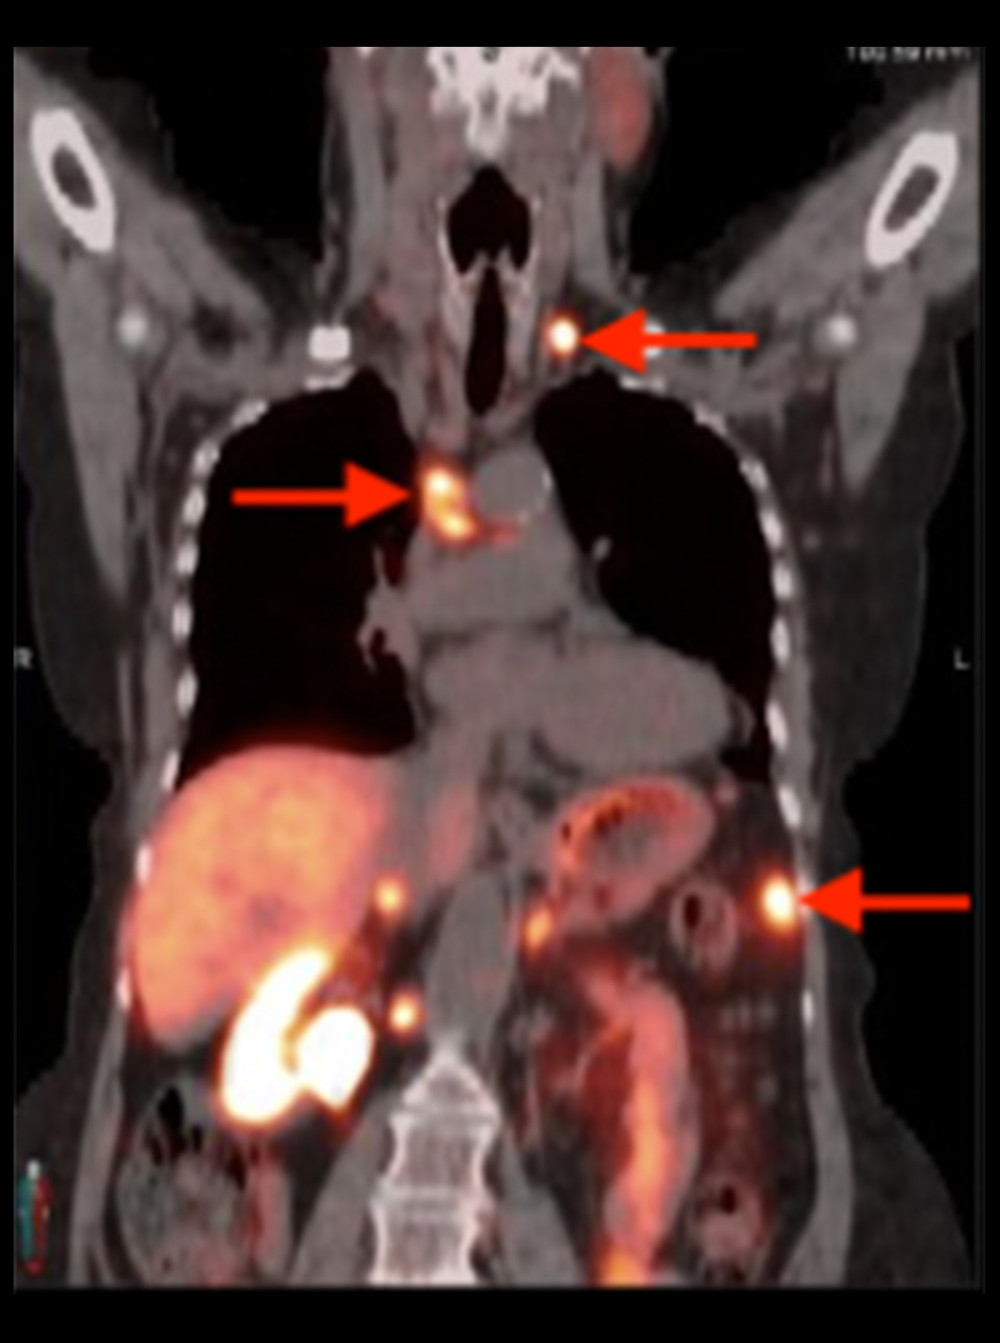 Dotatate PET/CT on December 11, 2019. There are coronal cuts through the mediastinum and posterior abdomen. The arrows indicate dotatate uptake in the parathyroid lymph nodes, mediastinum, and left lateral abdominal mesentery.